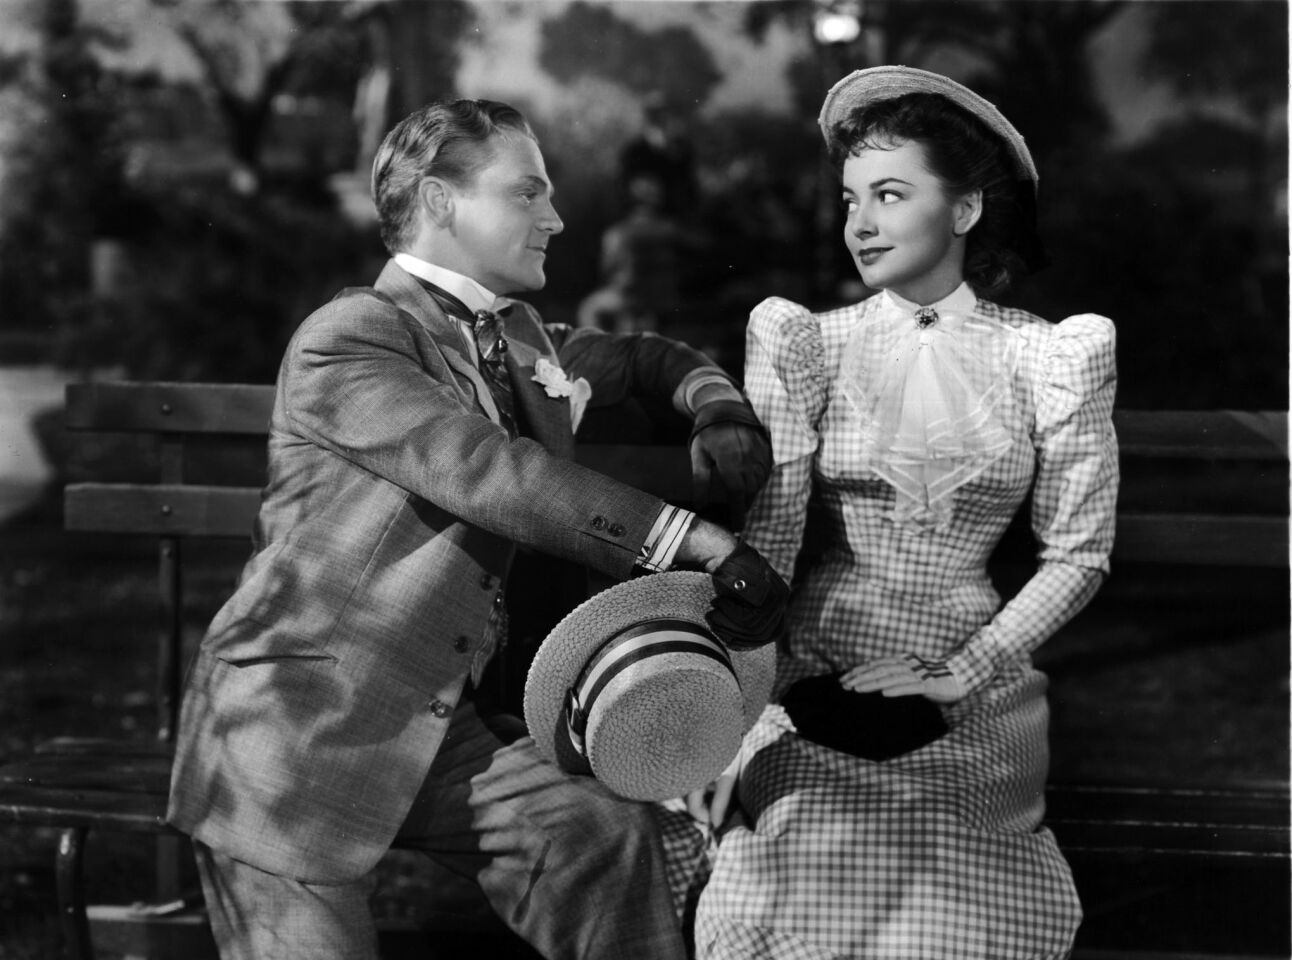 James Cagney and Olivia de Havilland in the 1941 movie "The Strawberry Blonde," directed by Raoul Walsh.